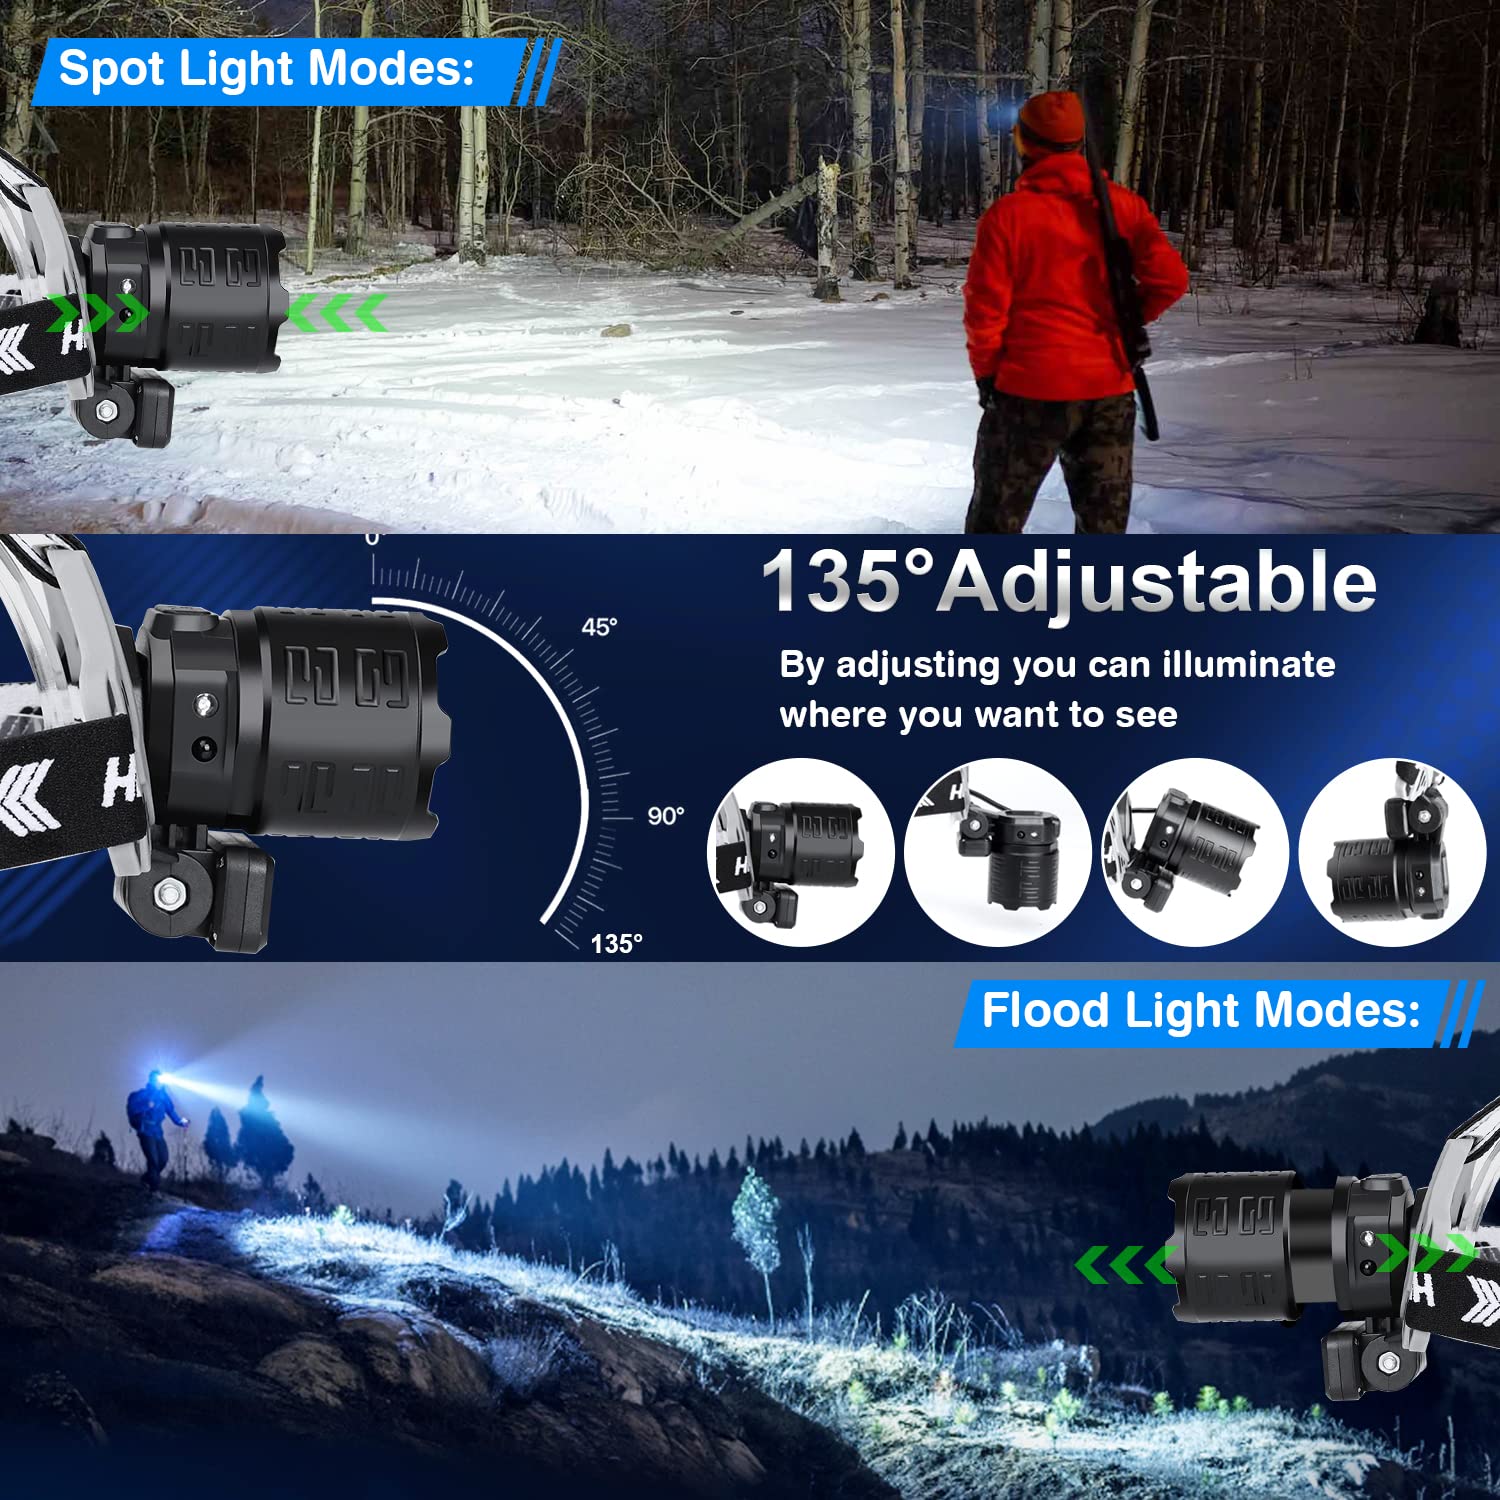 Bud K Rechargeable LED Headlamp, 120000 Lumens Super Bright Headlamp Flashlight with Motion Sensor, 8 Modes, 135°Adjustable, IPX7 Waterproof Head Lamp for Camping, Running, Climbing, Hiking